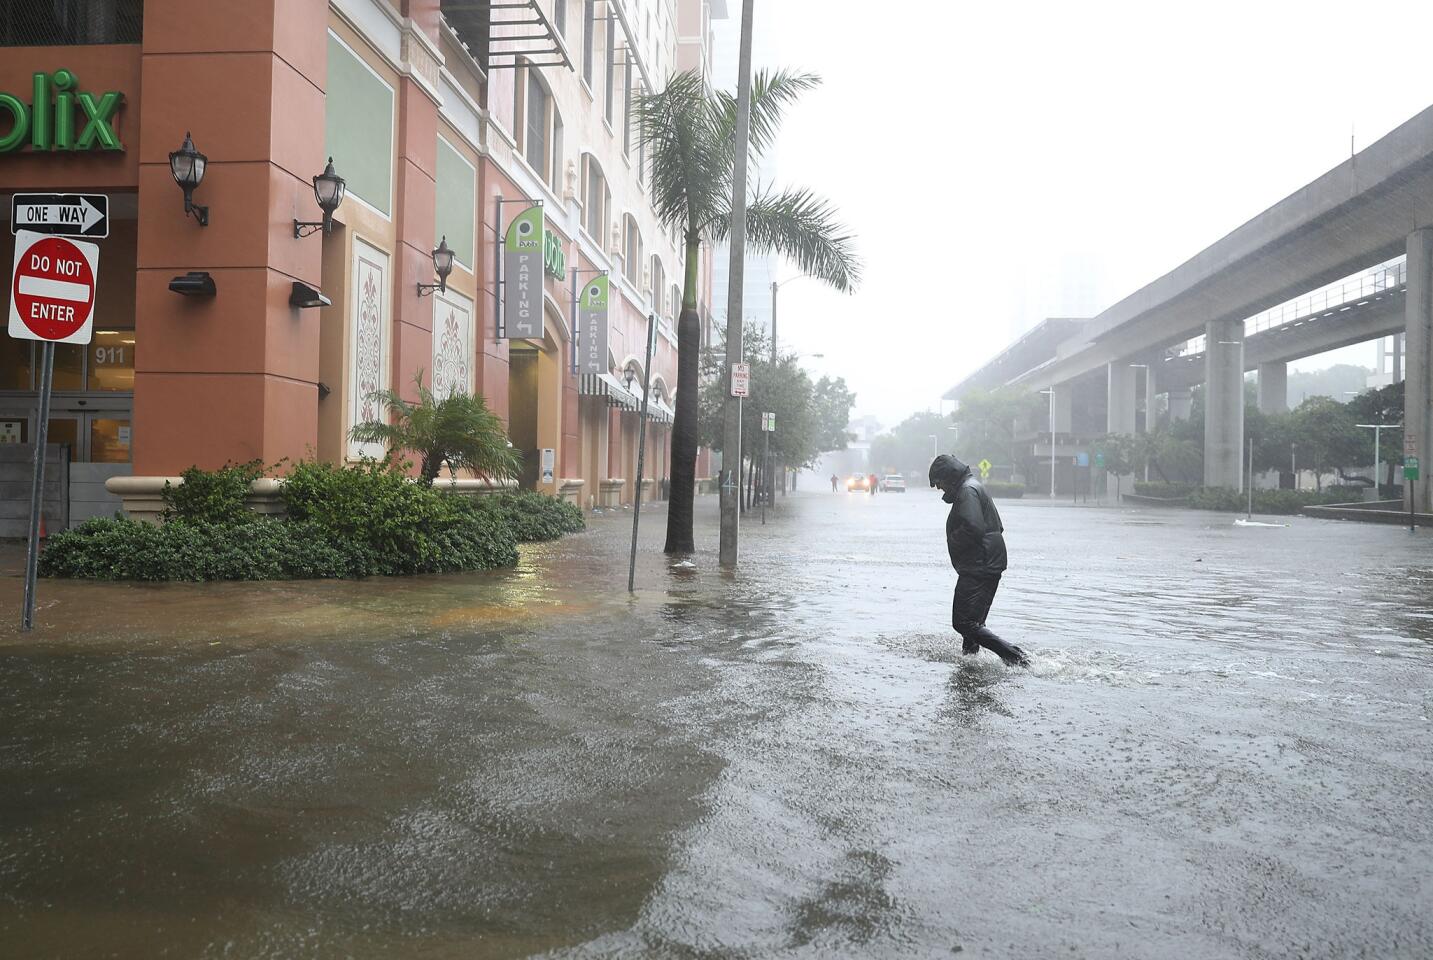 A person walks through a flooded street in the Brickell area of downtown Miami as Hurricane Irma passes through Sept. 10, 2017.